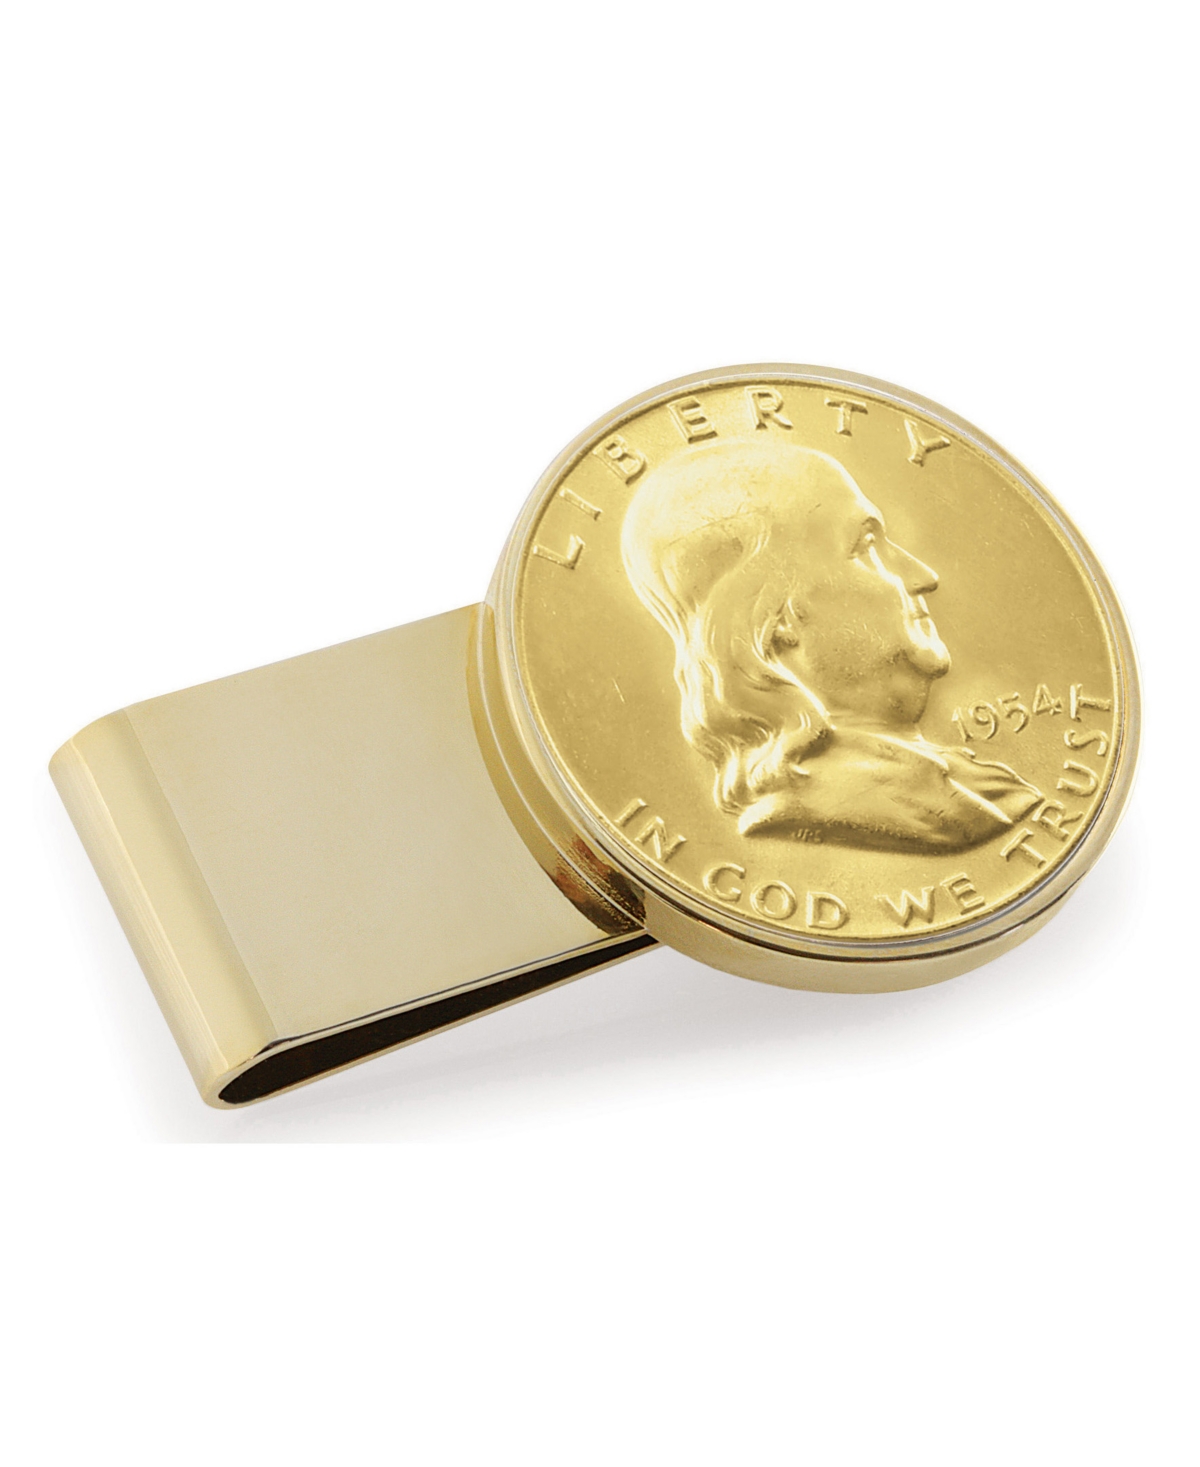 American Coin Treasures Men's American Coin Treasures Gold-Layered Silver Franklin Half Dollar Stainless Steel Coin Money Clip